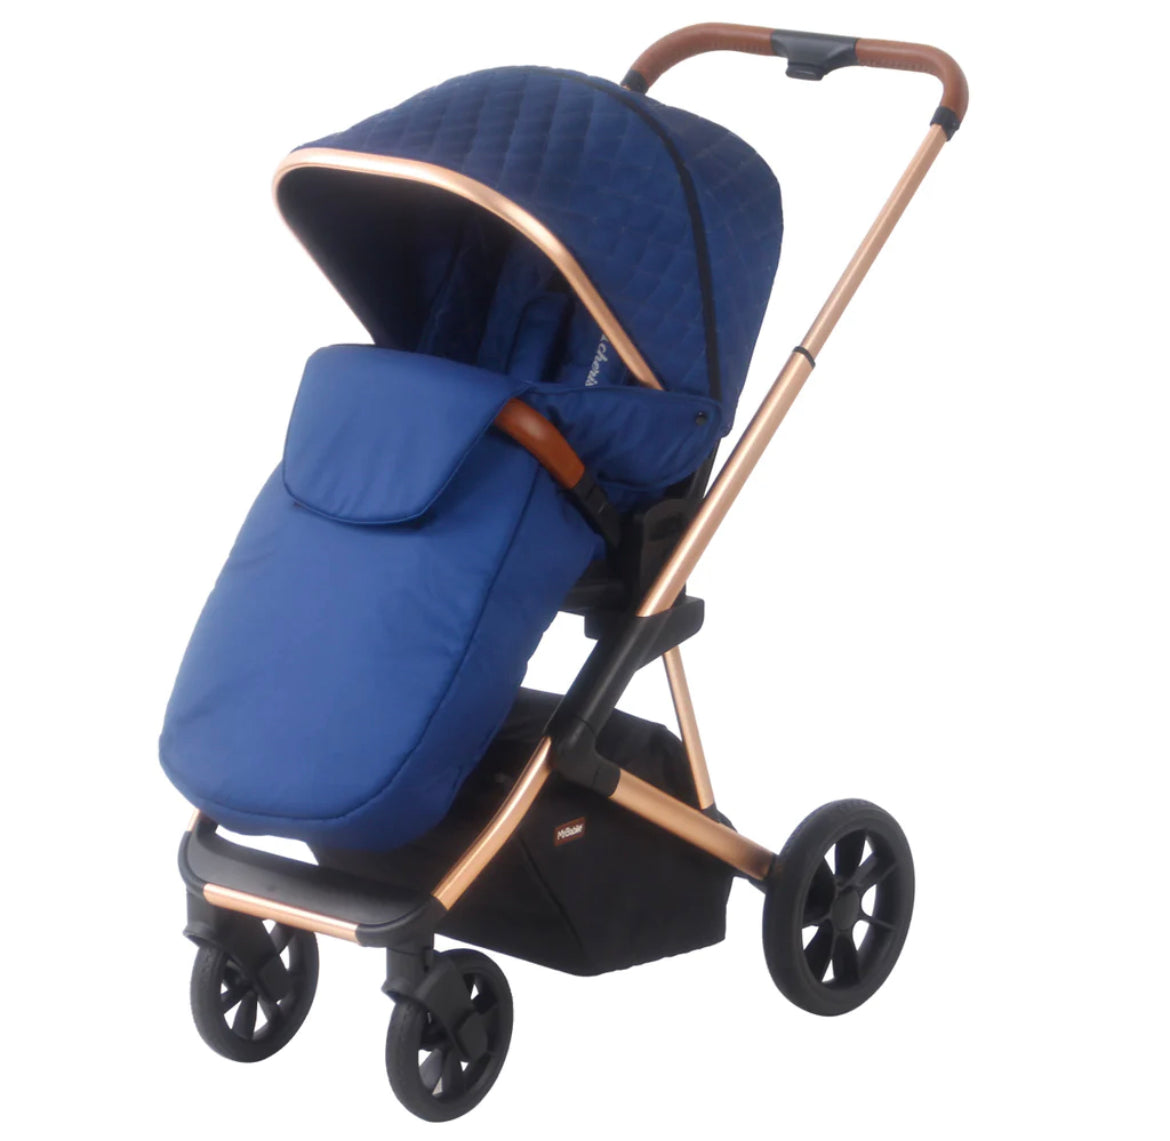 MB500i 3-in-1 Travel System with i-Size Car Seat - Dani Dyer Opal Blue